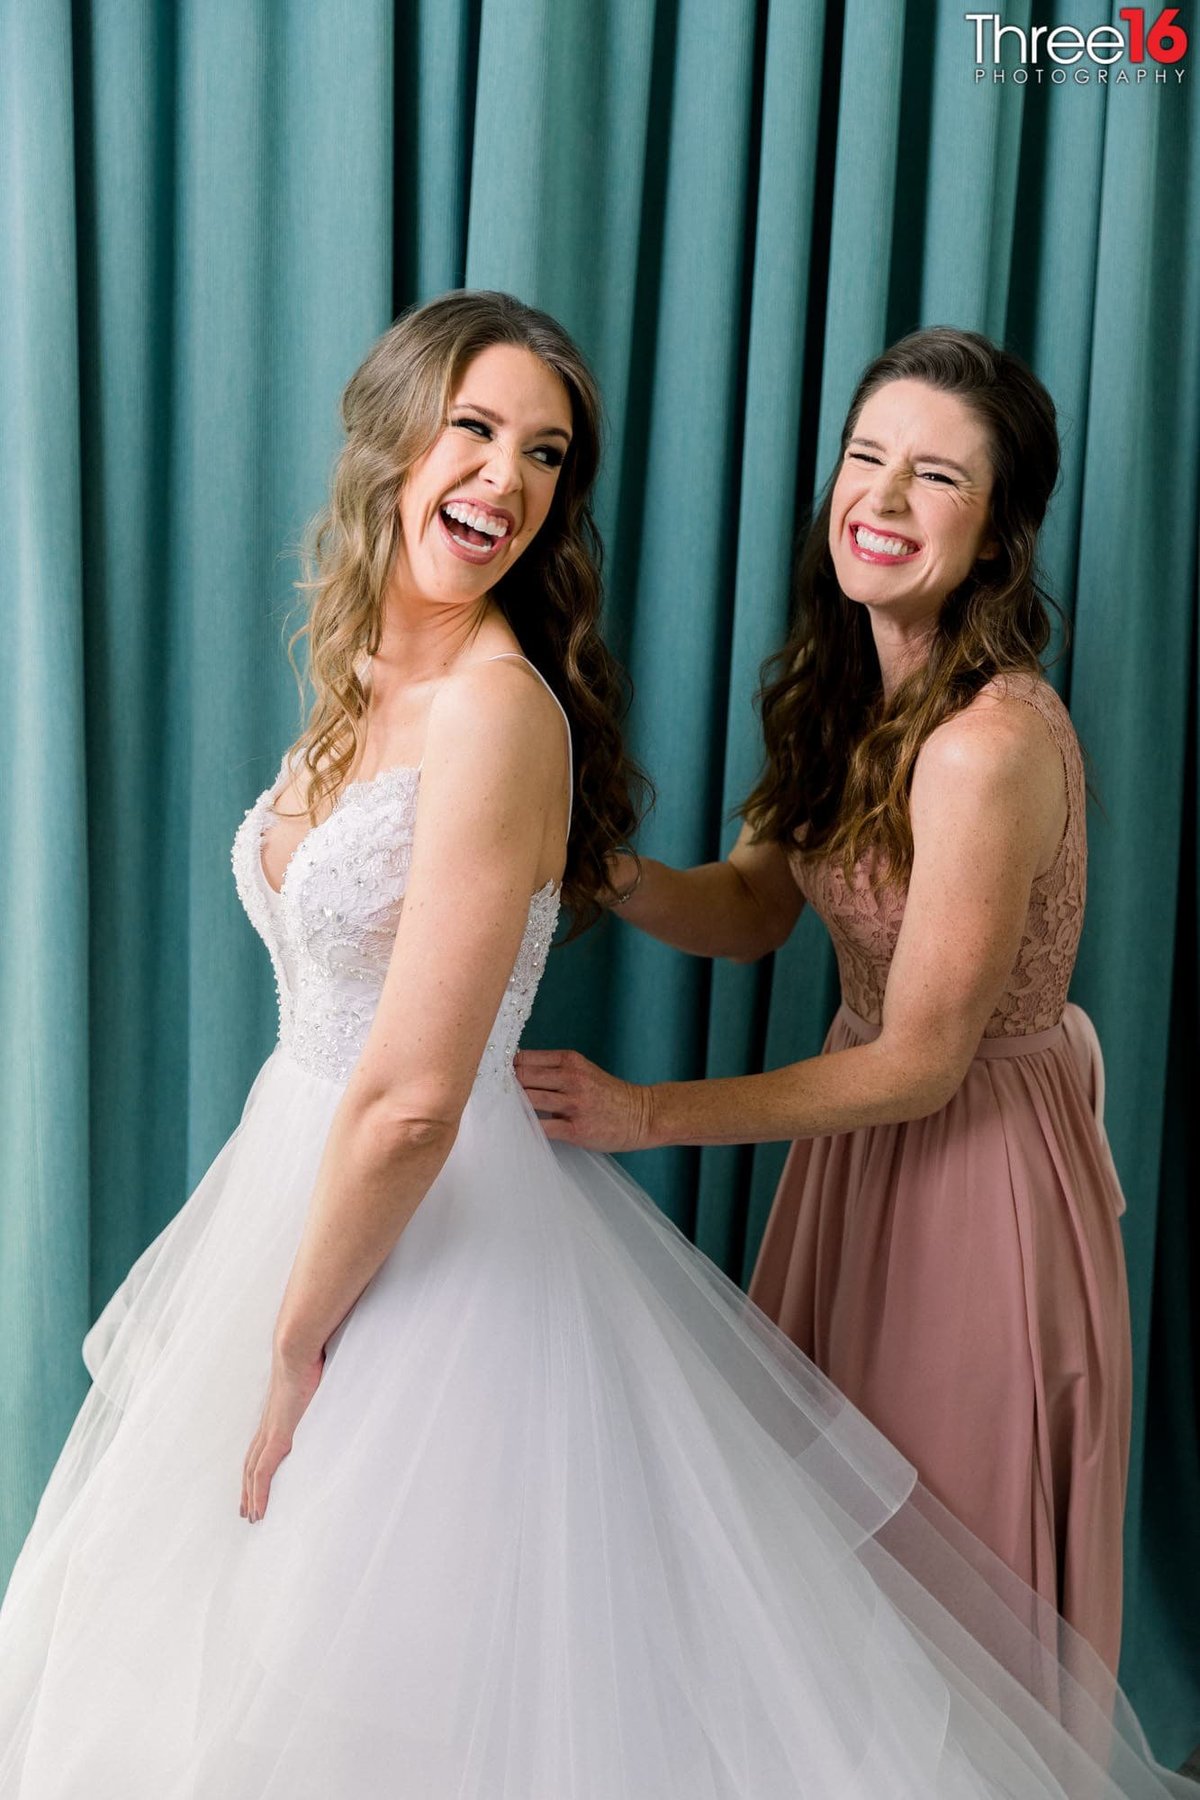 Bride and Maid of Honor share a laugh while Bride's dress is being buttoned up